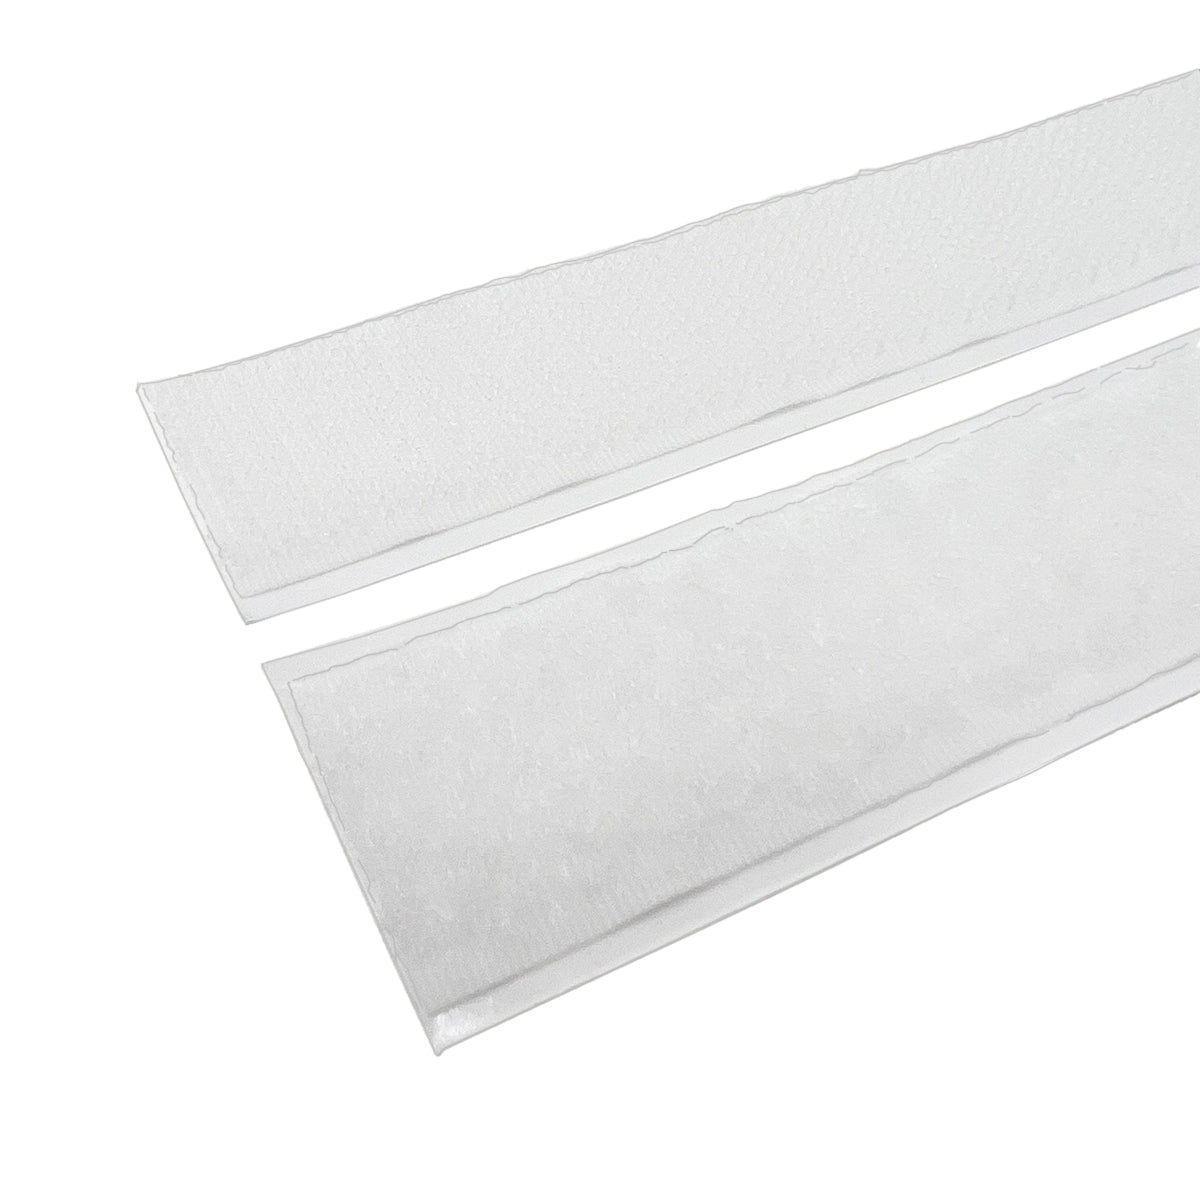 White Adhesive Velcro Hook and Loop 1" x 8"